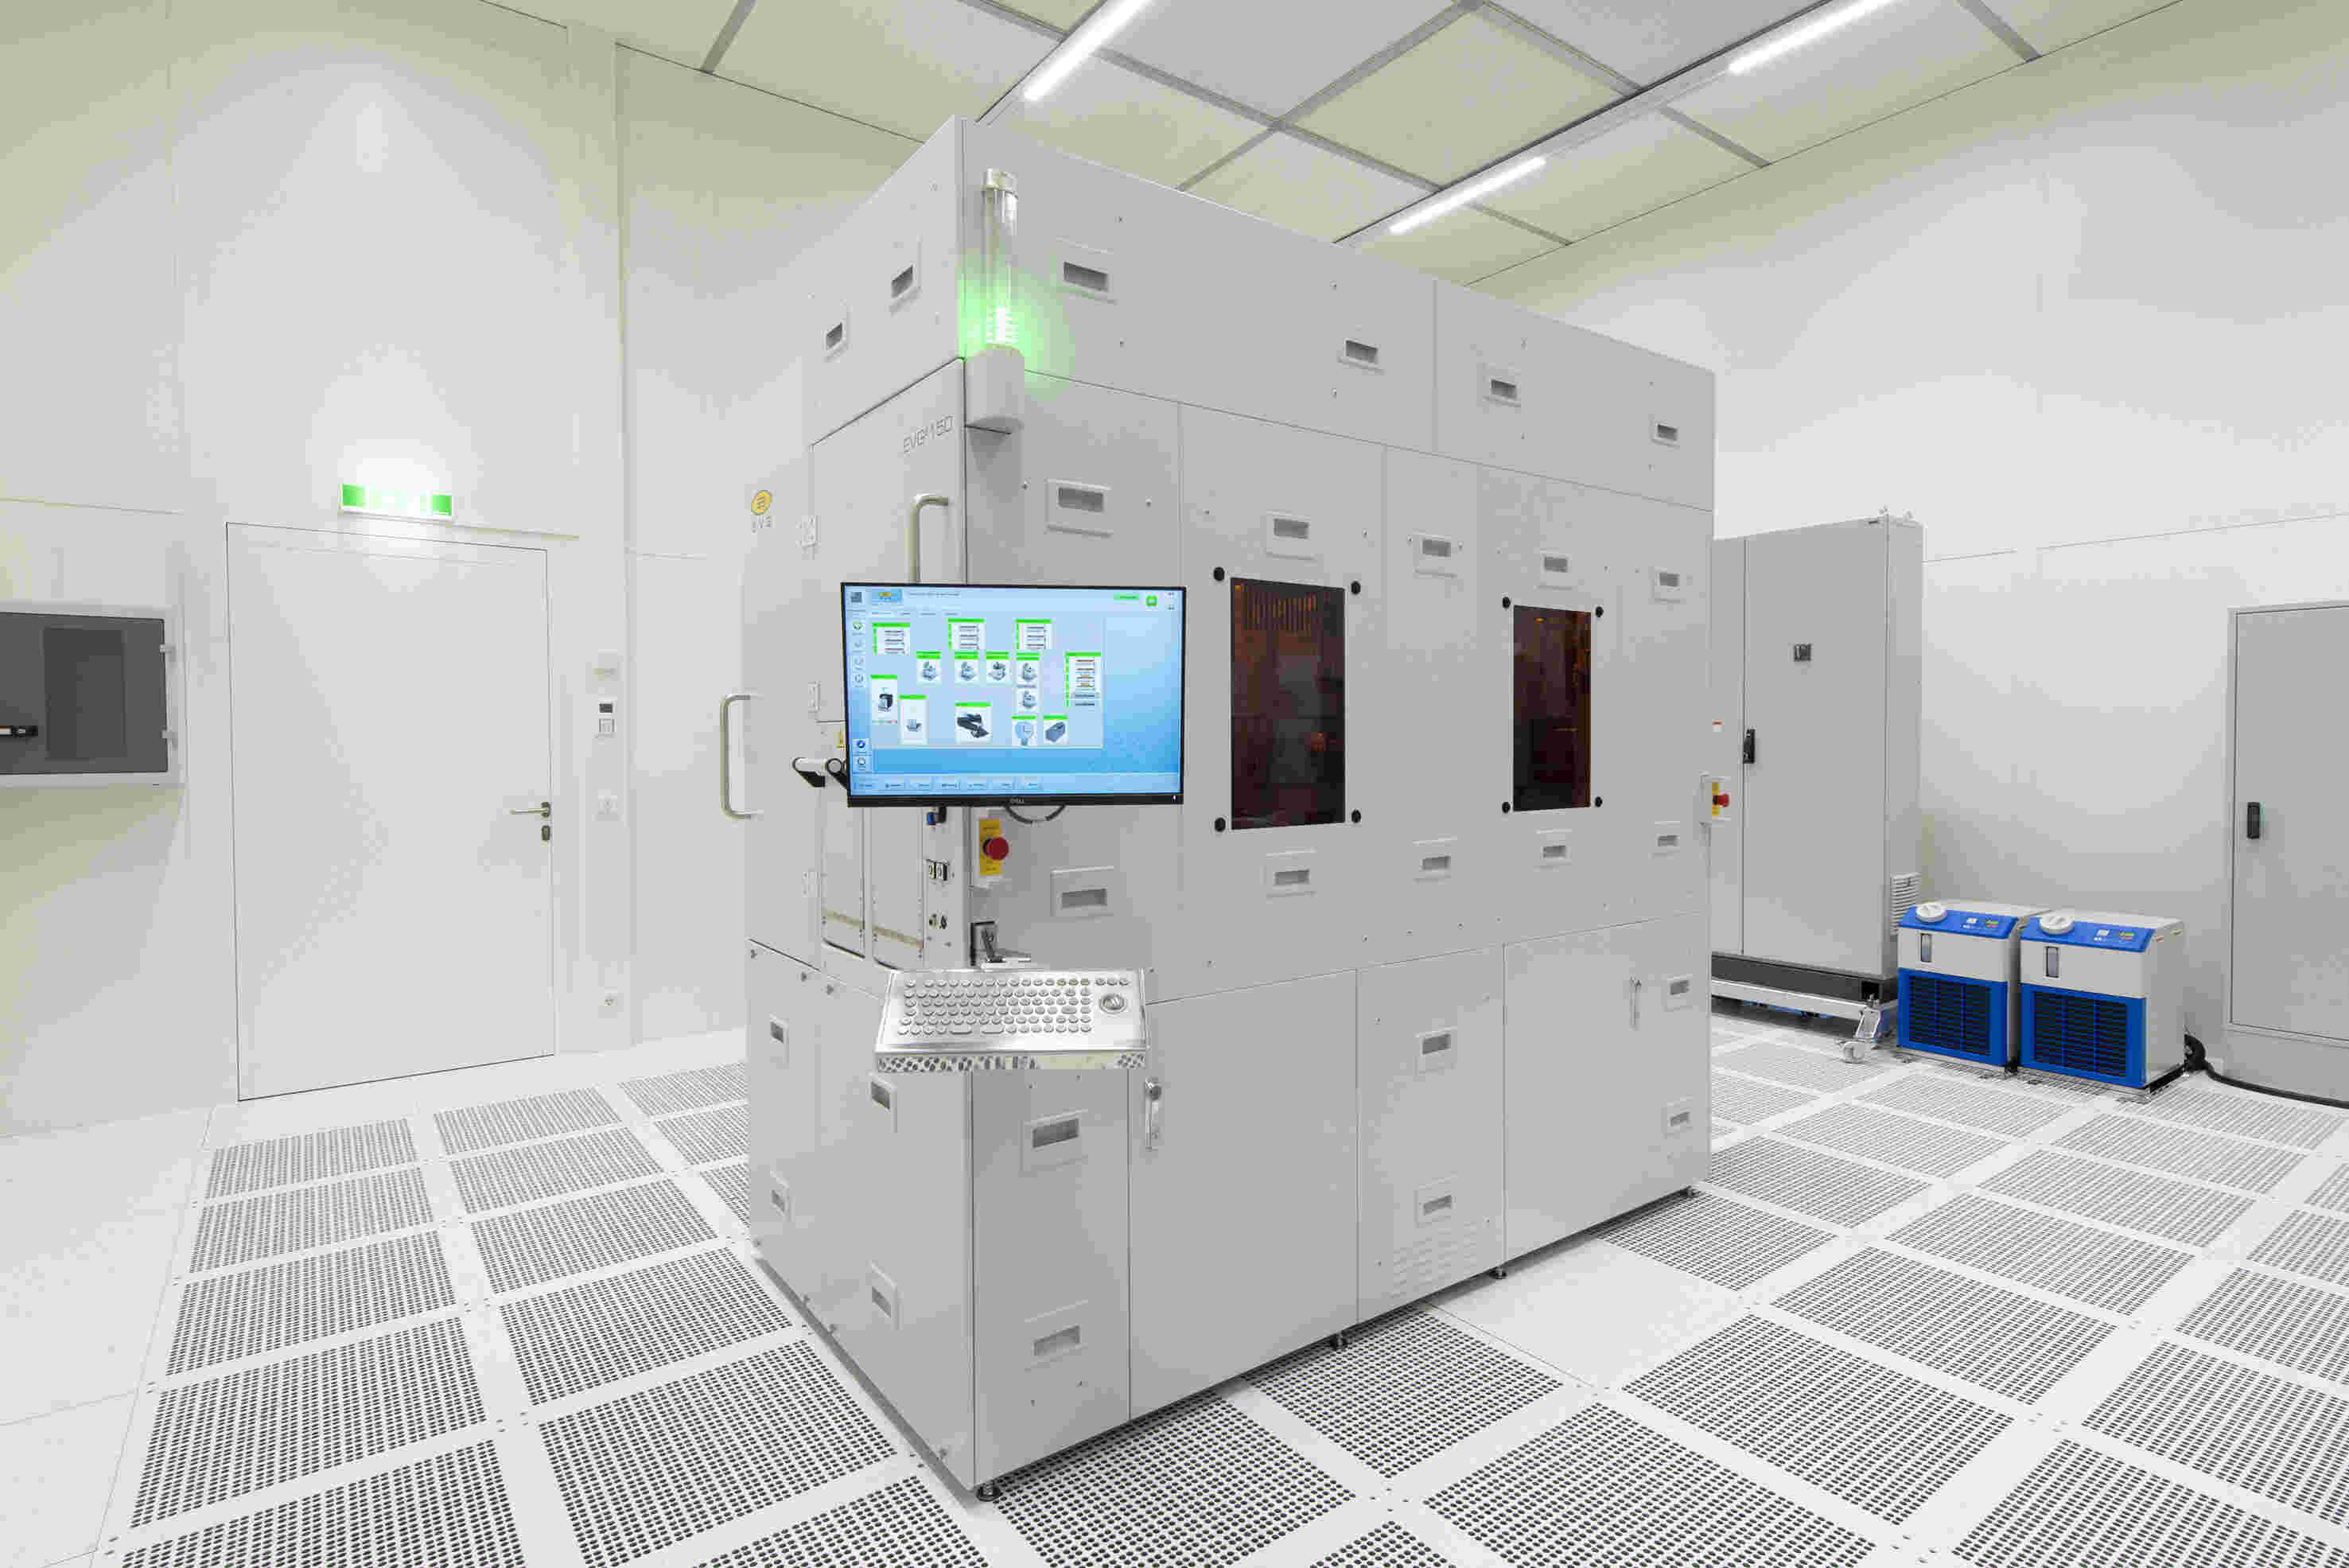 The EVG®150 automated resist processing system provides reliable and high-quality coating and developing processes in a universal platform that supports a variety of devices and applications, including advanced packaging, MEMS, radio frequency (RF), 3D sensing, power electronics, and photonics